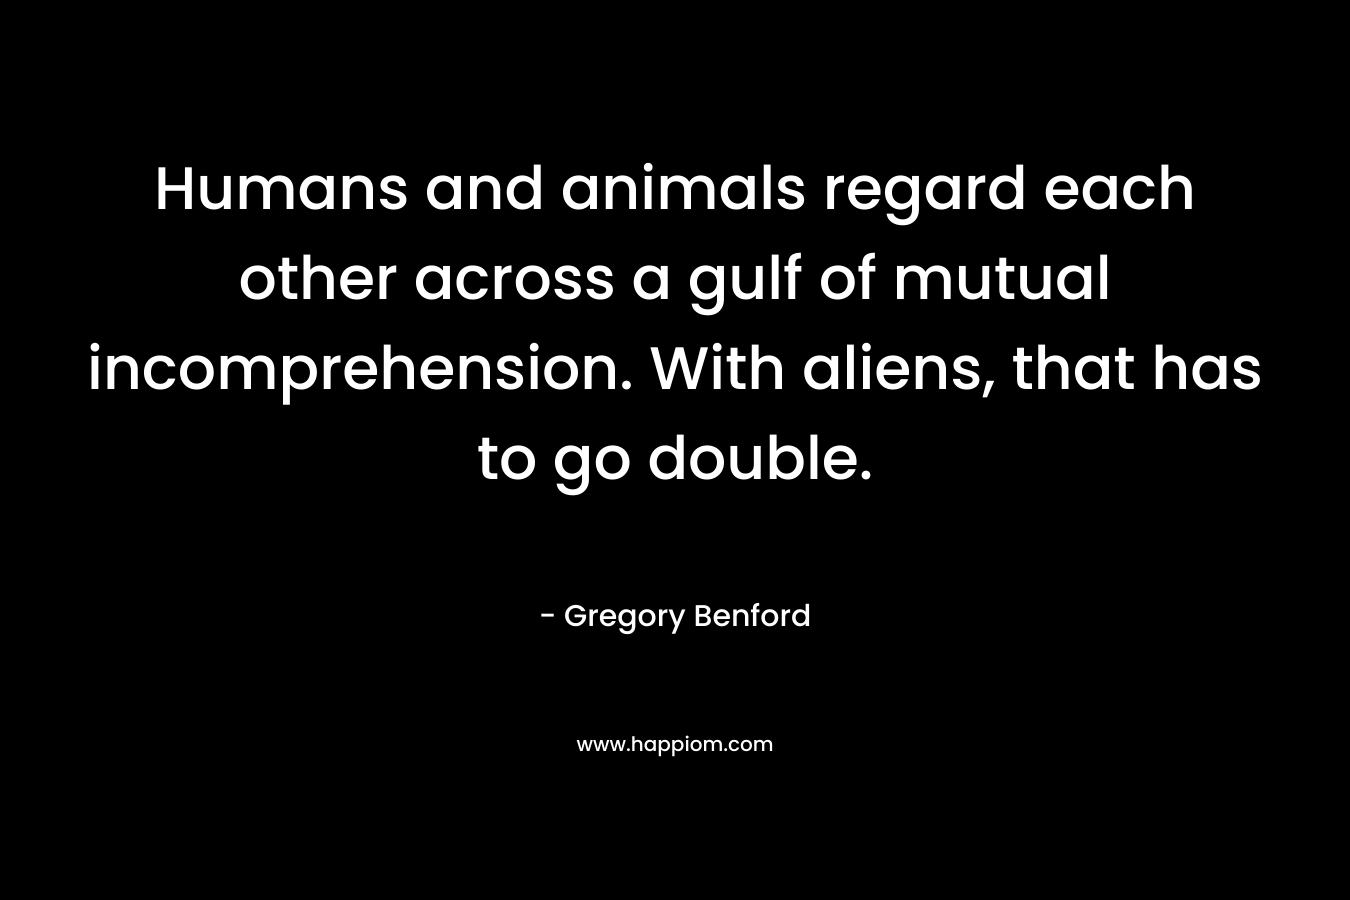 Humans and animals regard each other across a gulf of mutual incomprehension. With aliens, that has to go double. – Gregory Benford